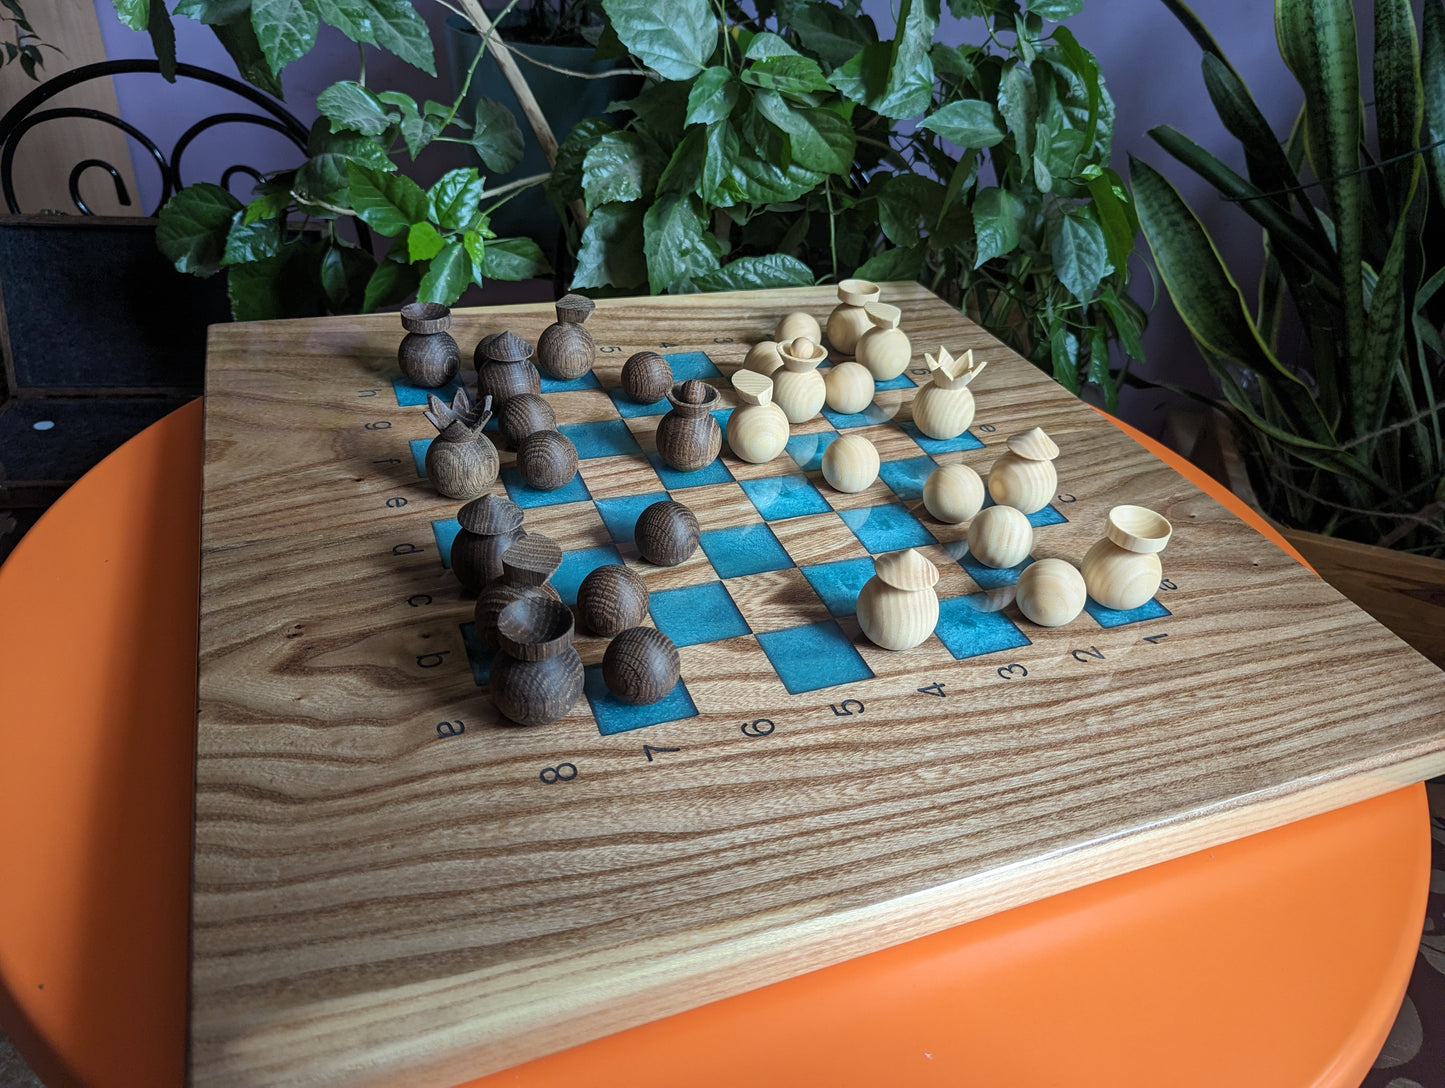 Handmade 23" chess table with notations. Wood and epoxy.